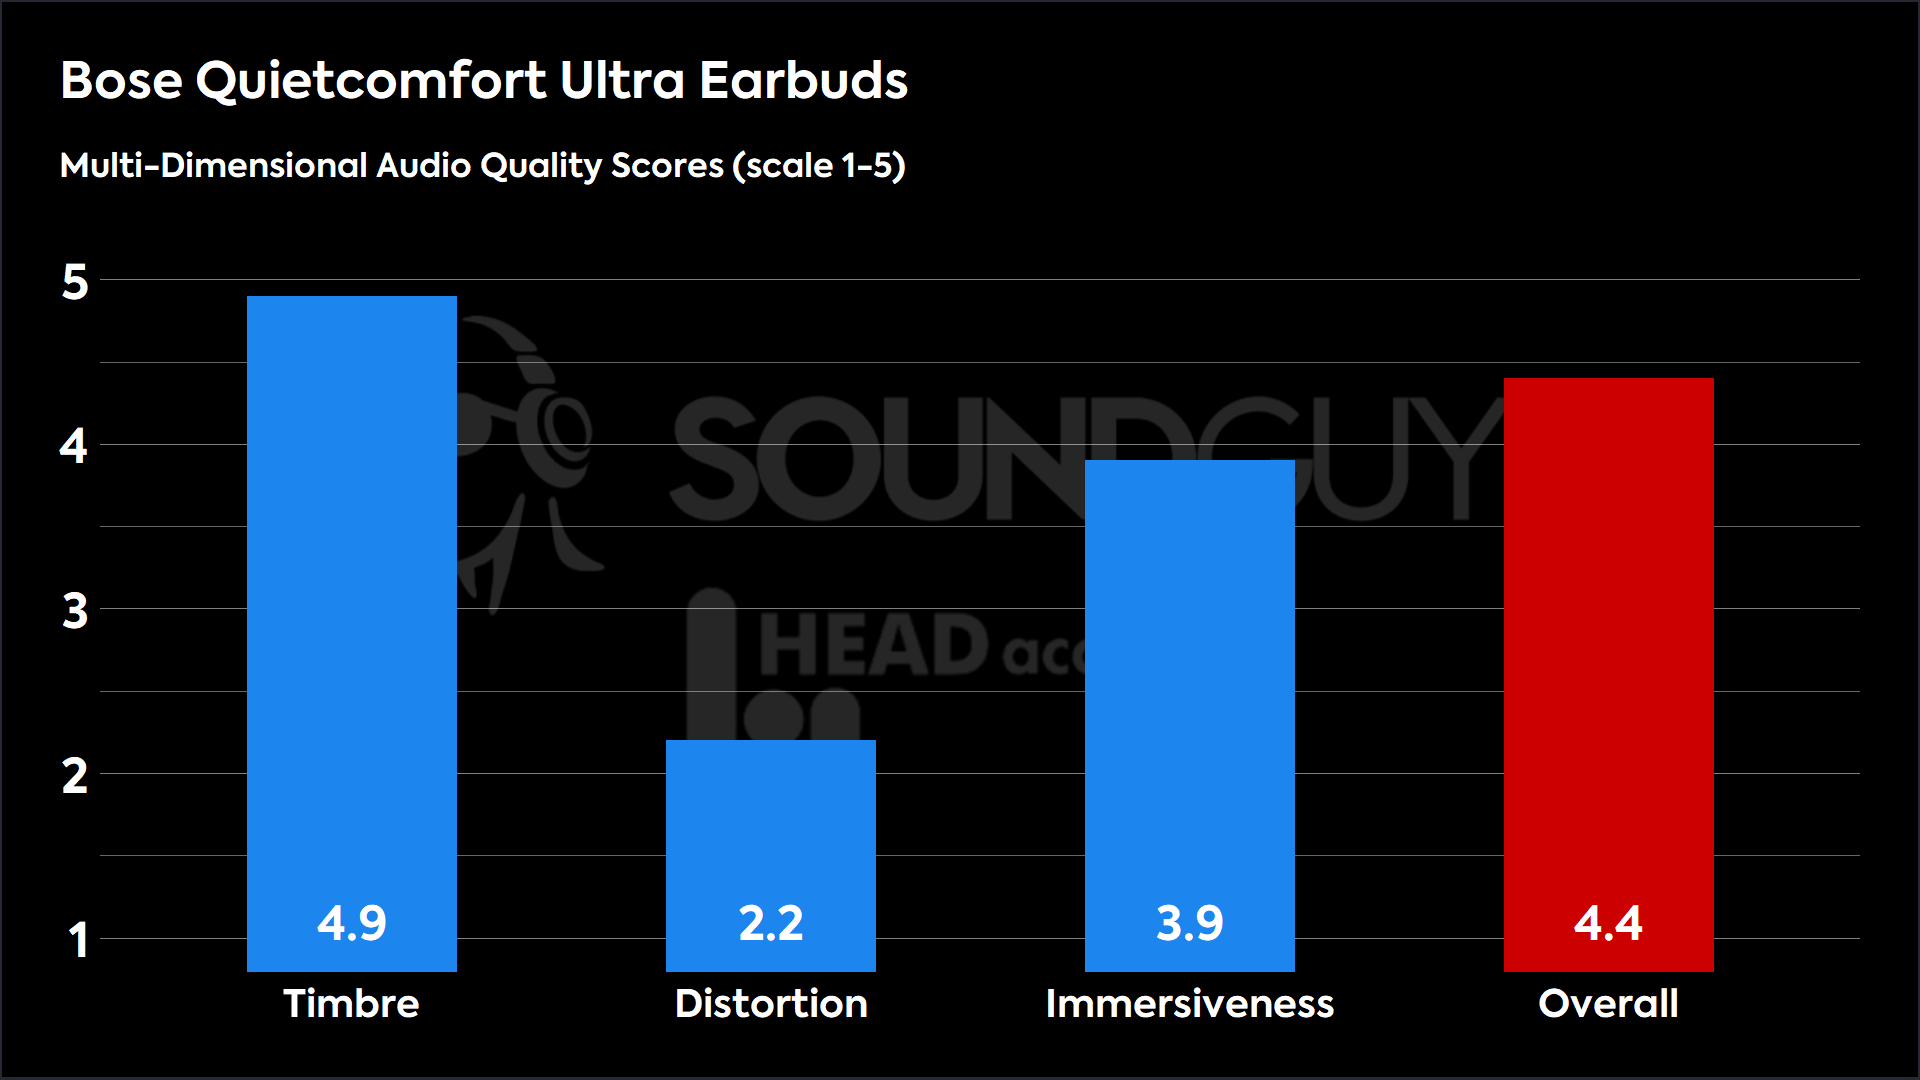 This chart shows the MDAQS results for the Bose Quietcomfort Ultra Earbuds in Default mode. The Timbre score is 4.9, The Distortion score is 2.2, the Immersiveness score is 3.9, and the Overall Score is 4.4).